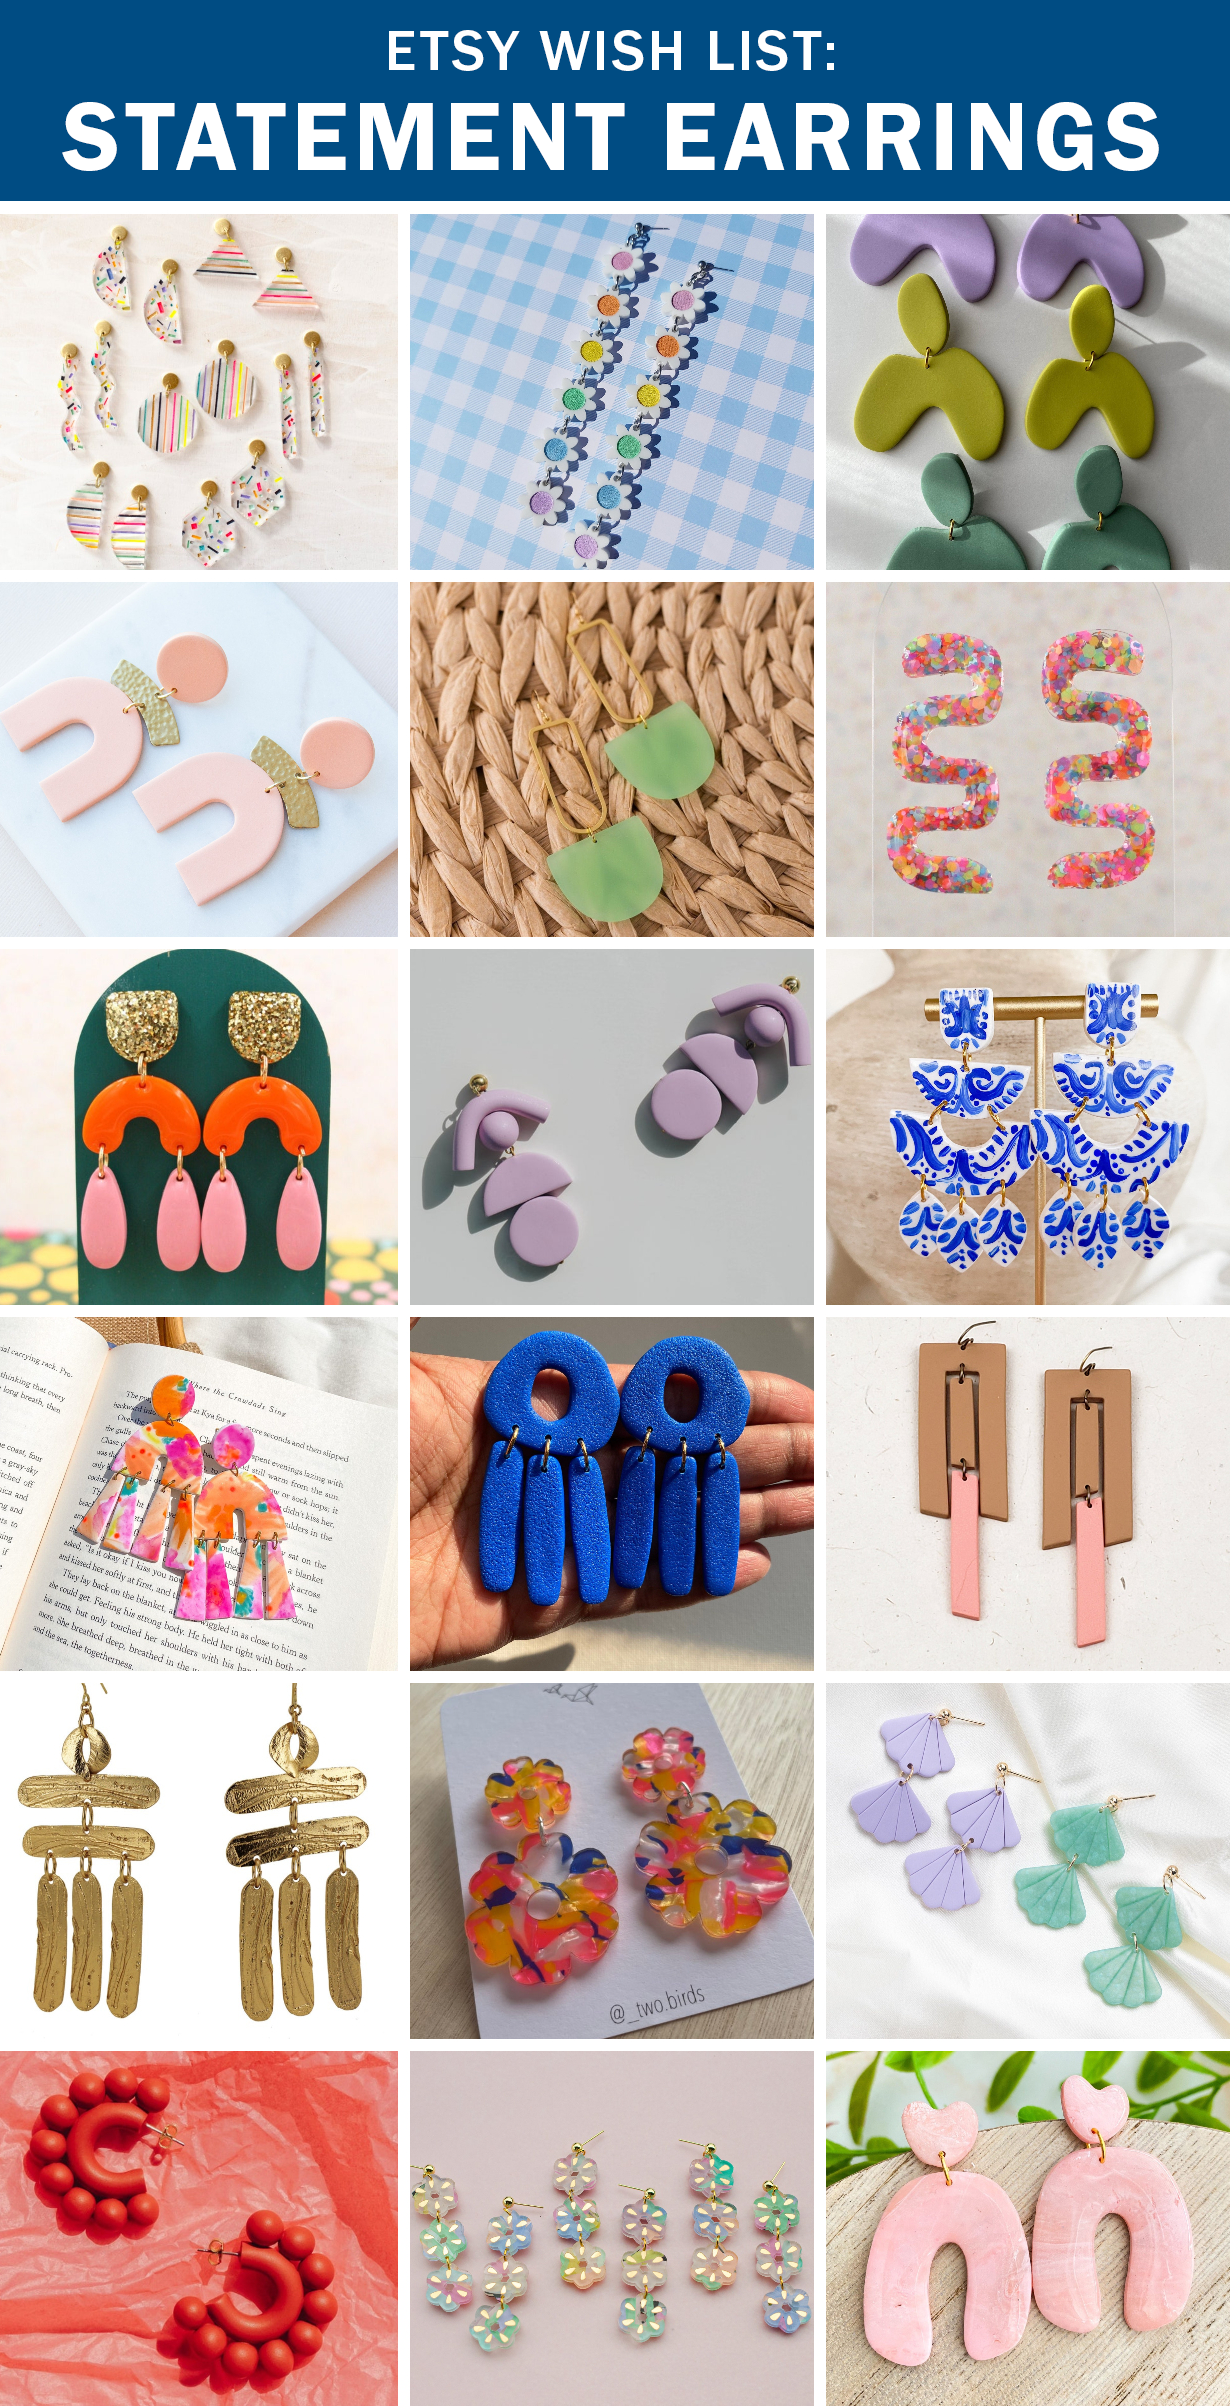 Add color to your wardrobe with these statement earrings (all found from small businesses on Etsy!)